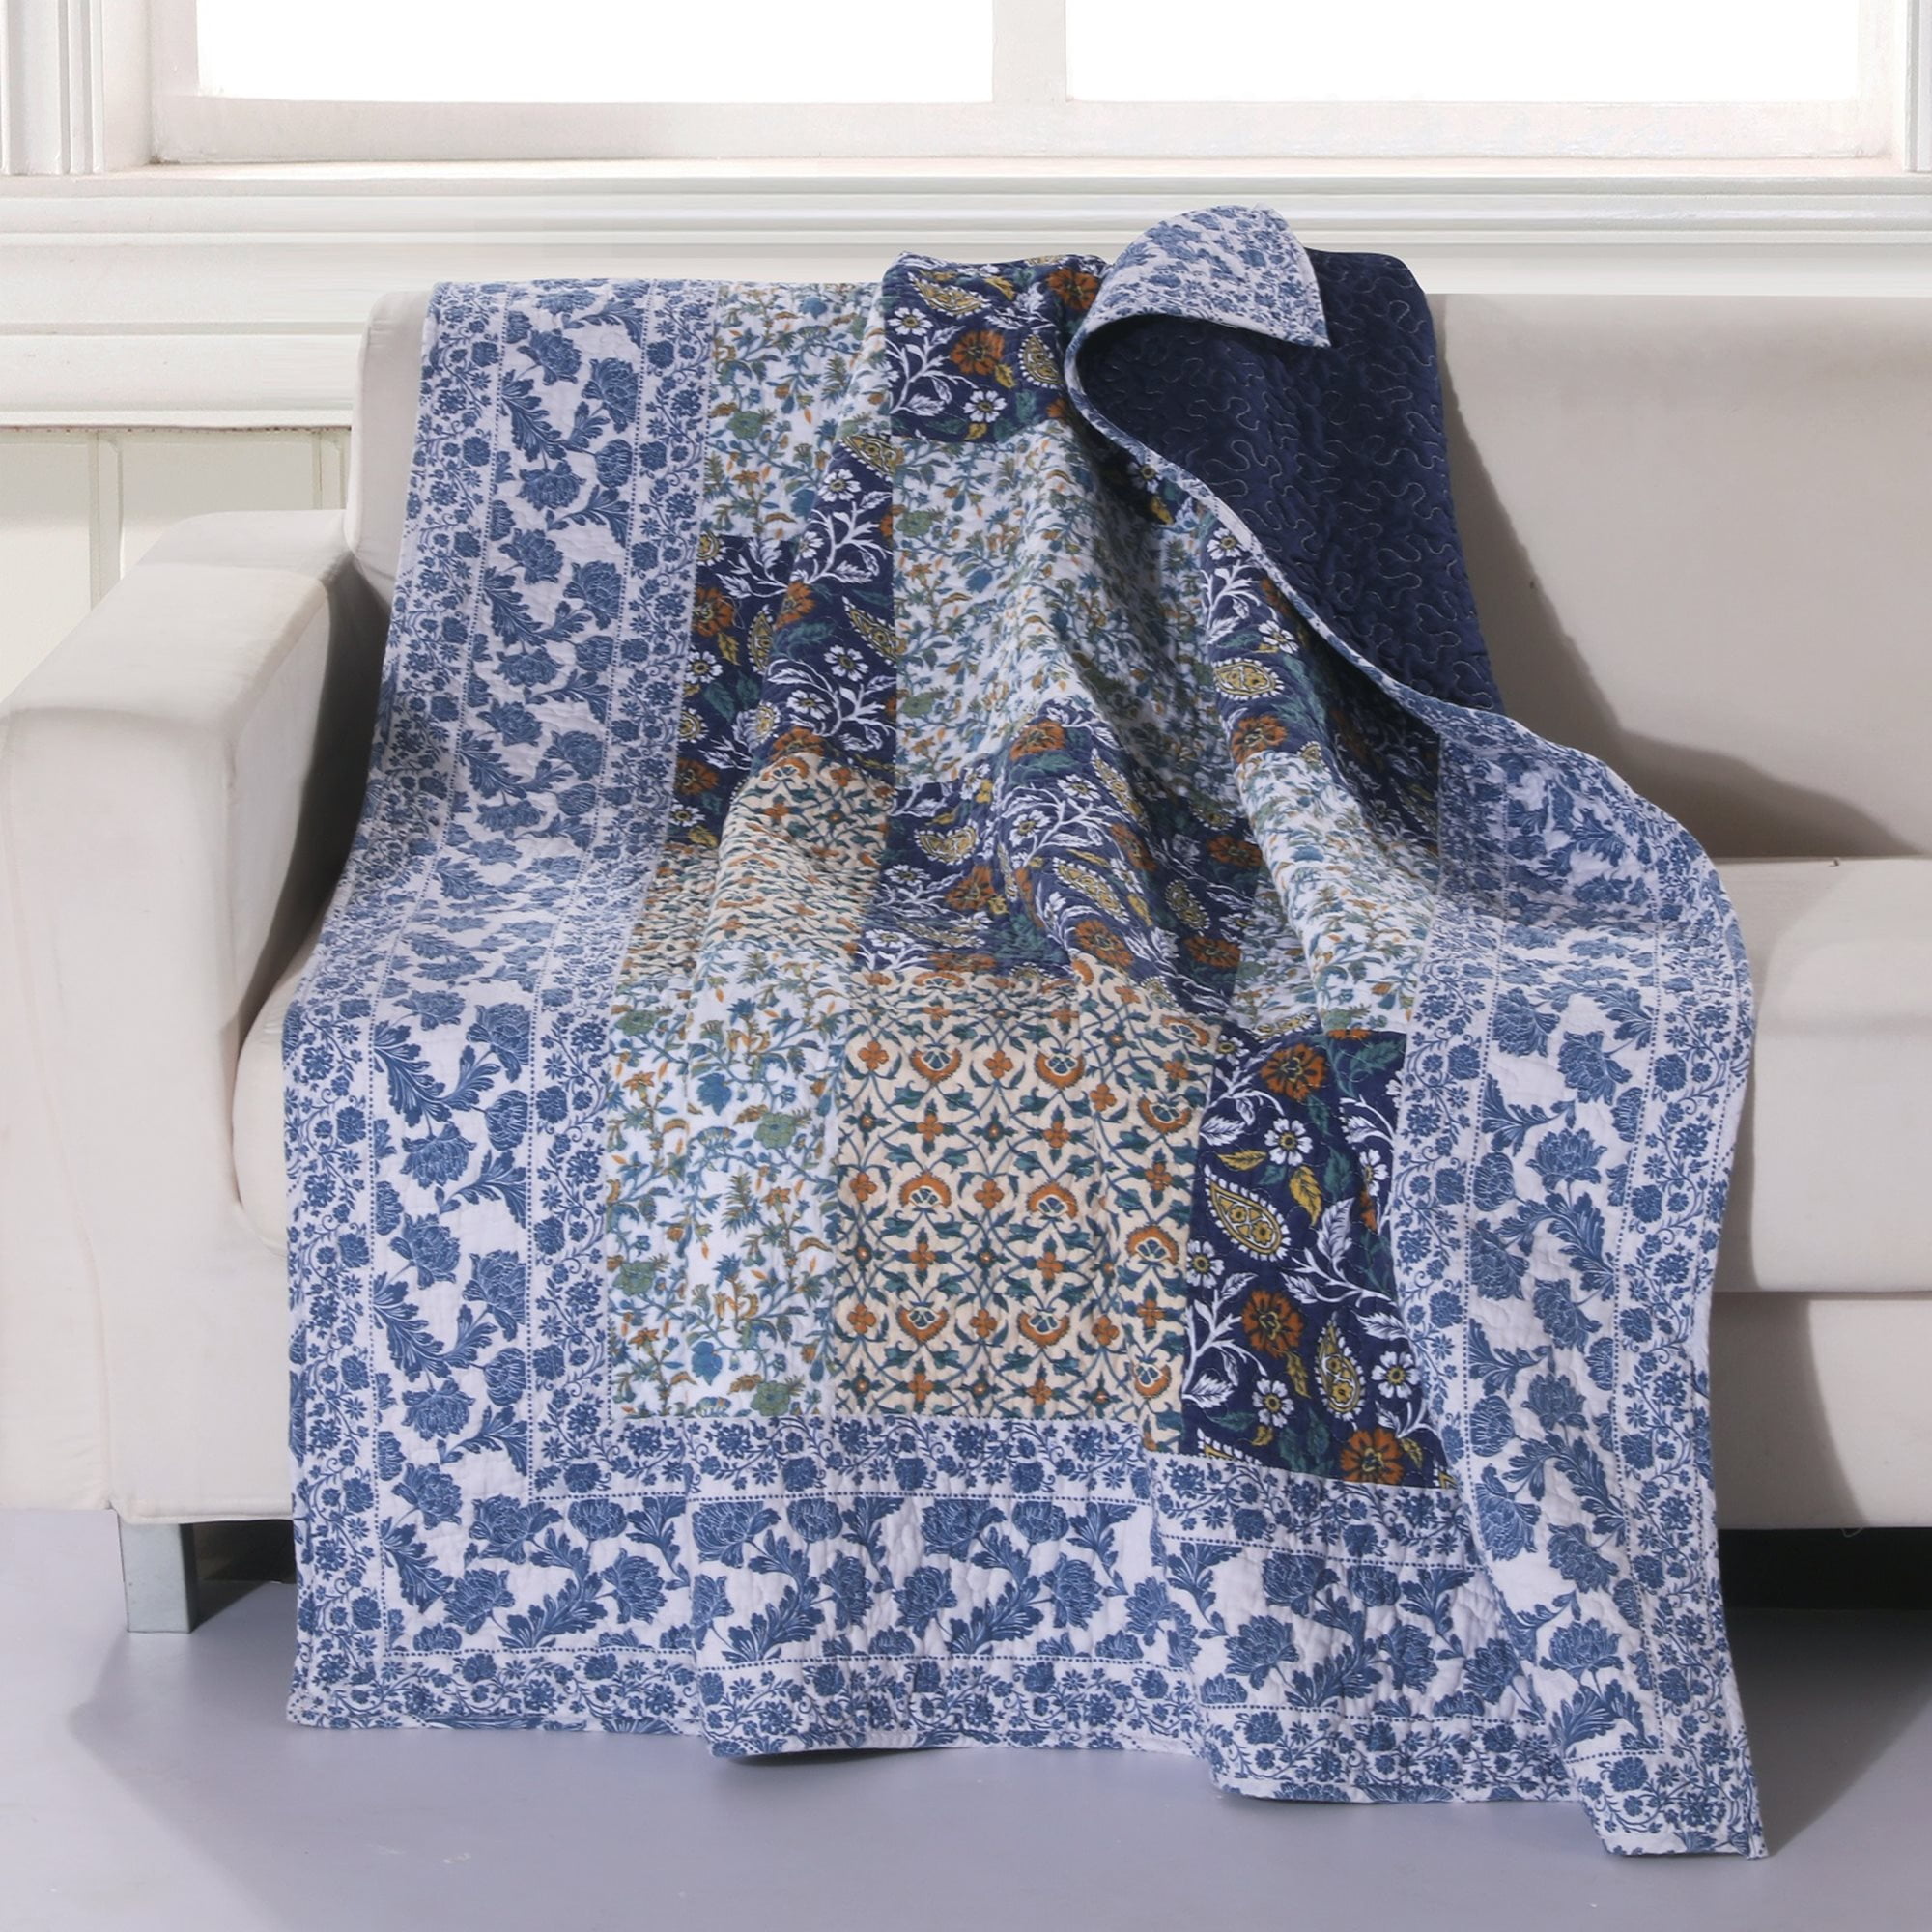 Pandora Quilted Throw Blanket by Greenland Home Fashions - Walmart.com